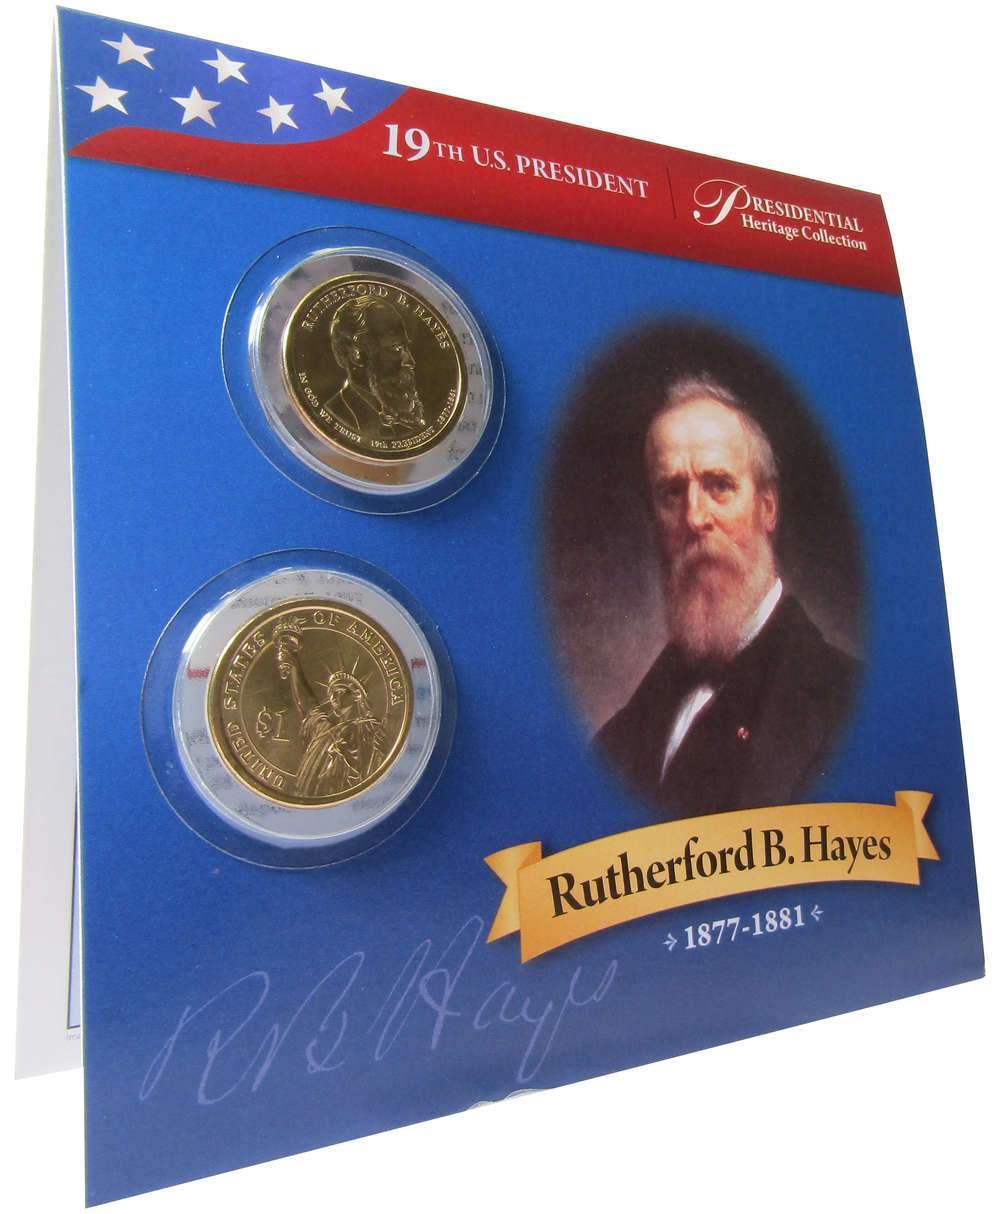 2011 P&D Rutherford Hayes Presidential Dollar 2 Coin Set BU Uncirculated Bifold